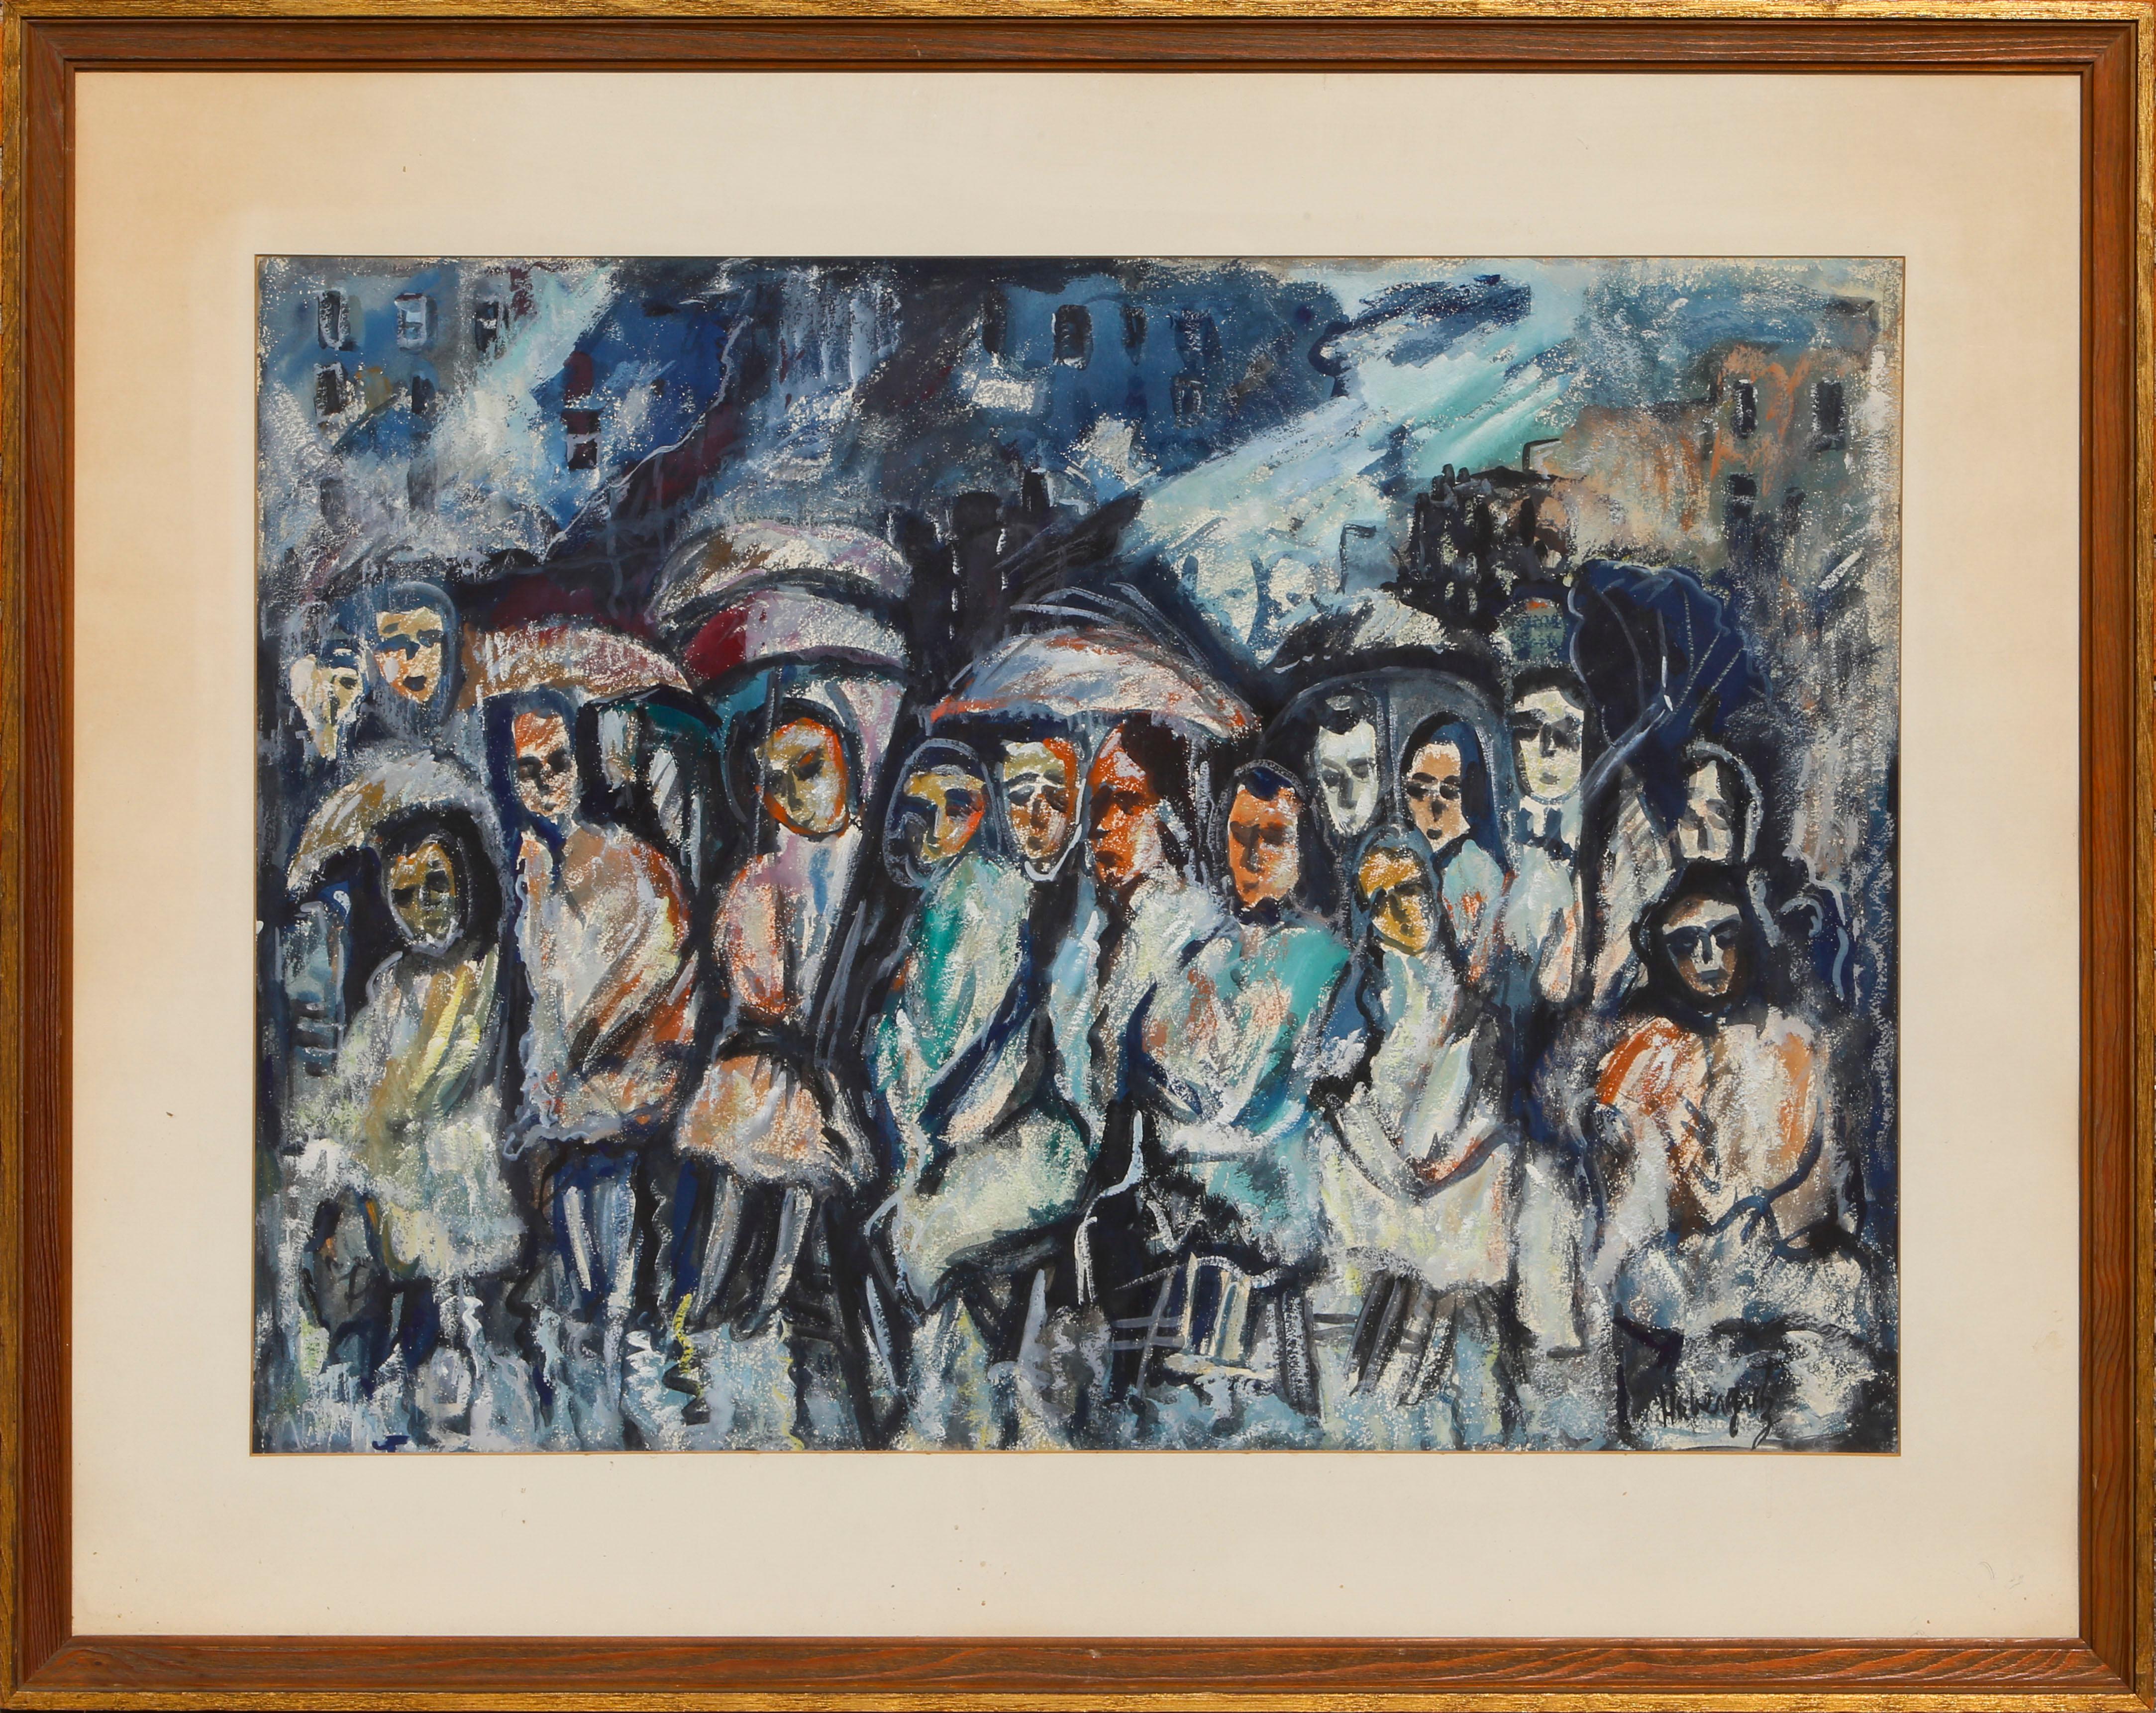 Concert in the Rain, Watercolor and Pastel on Paper by George Habergritz